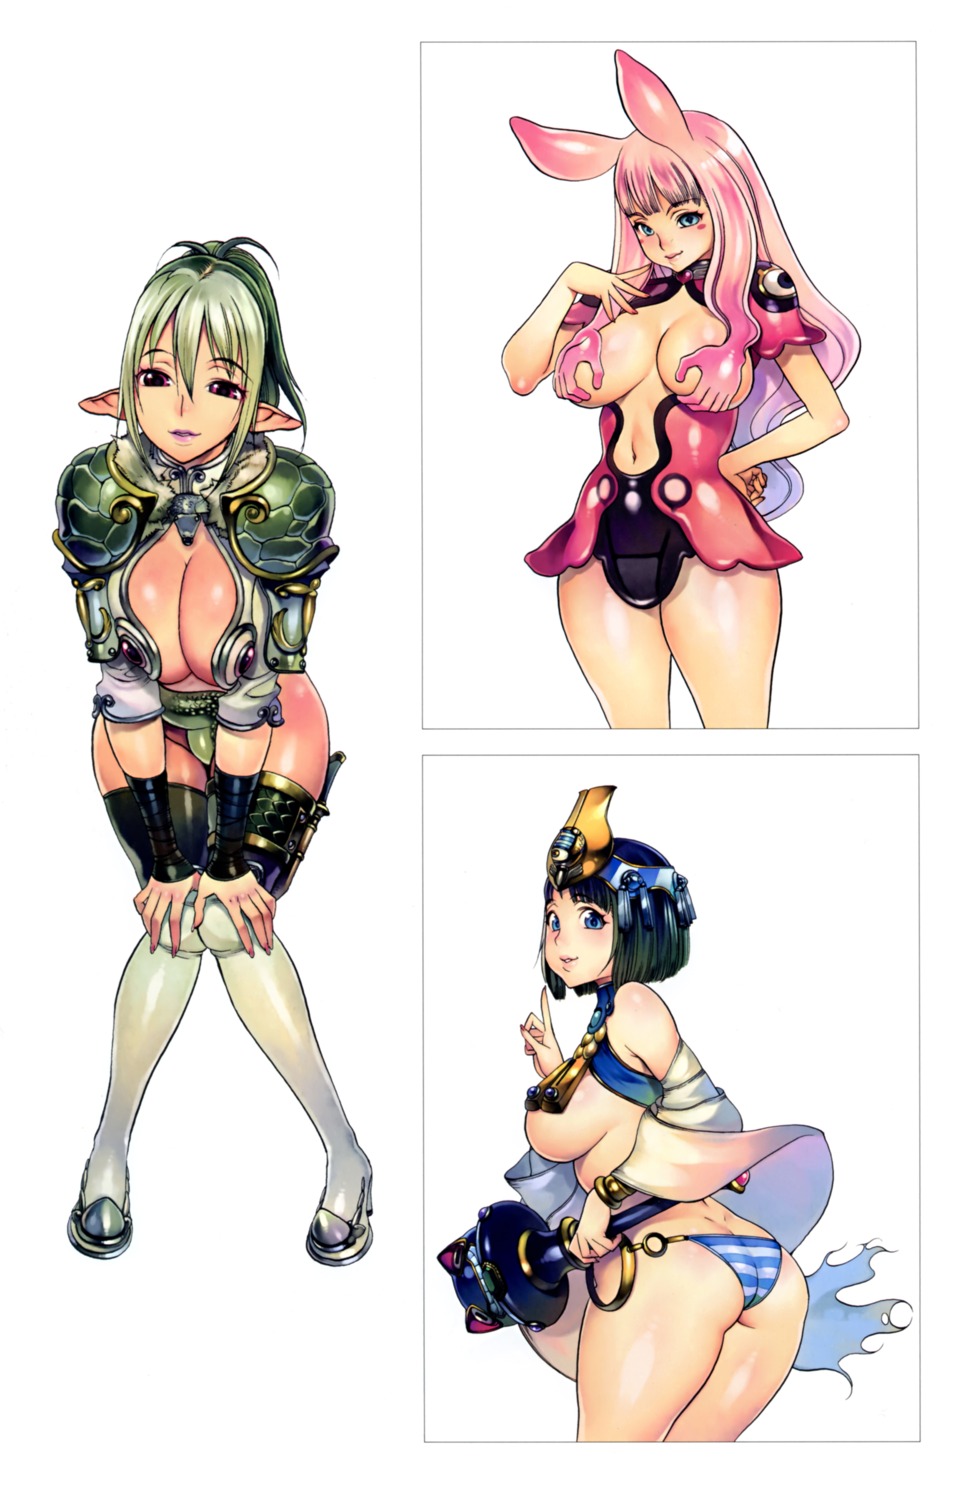 armor ass breast_grab breasts echidna f.s heels melona menace no_bra pantsu pointy_ears queen's_blade shimapan thighhighs weapon